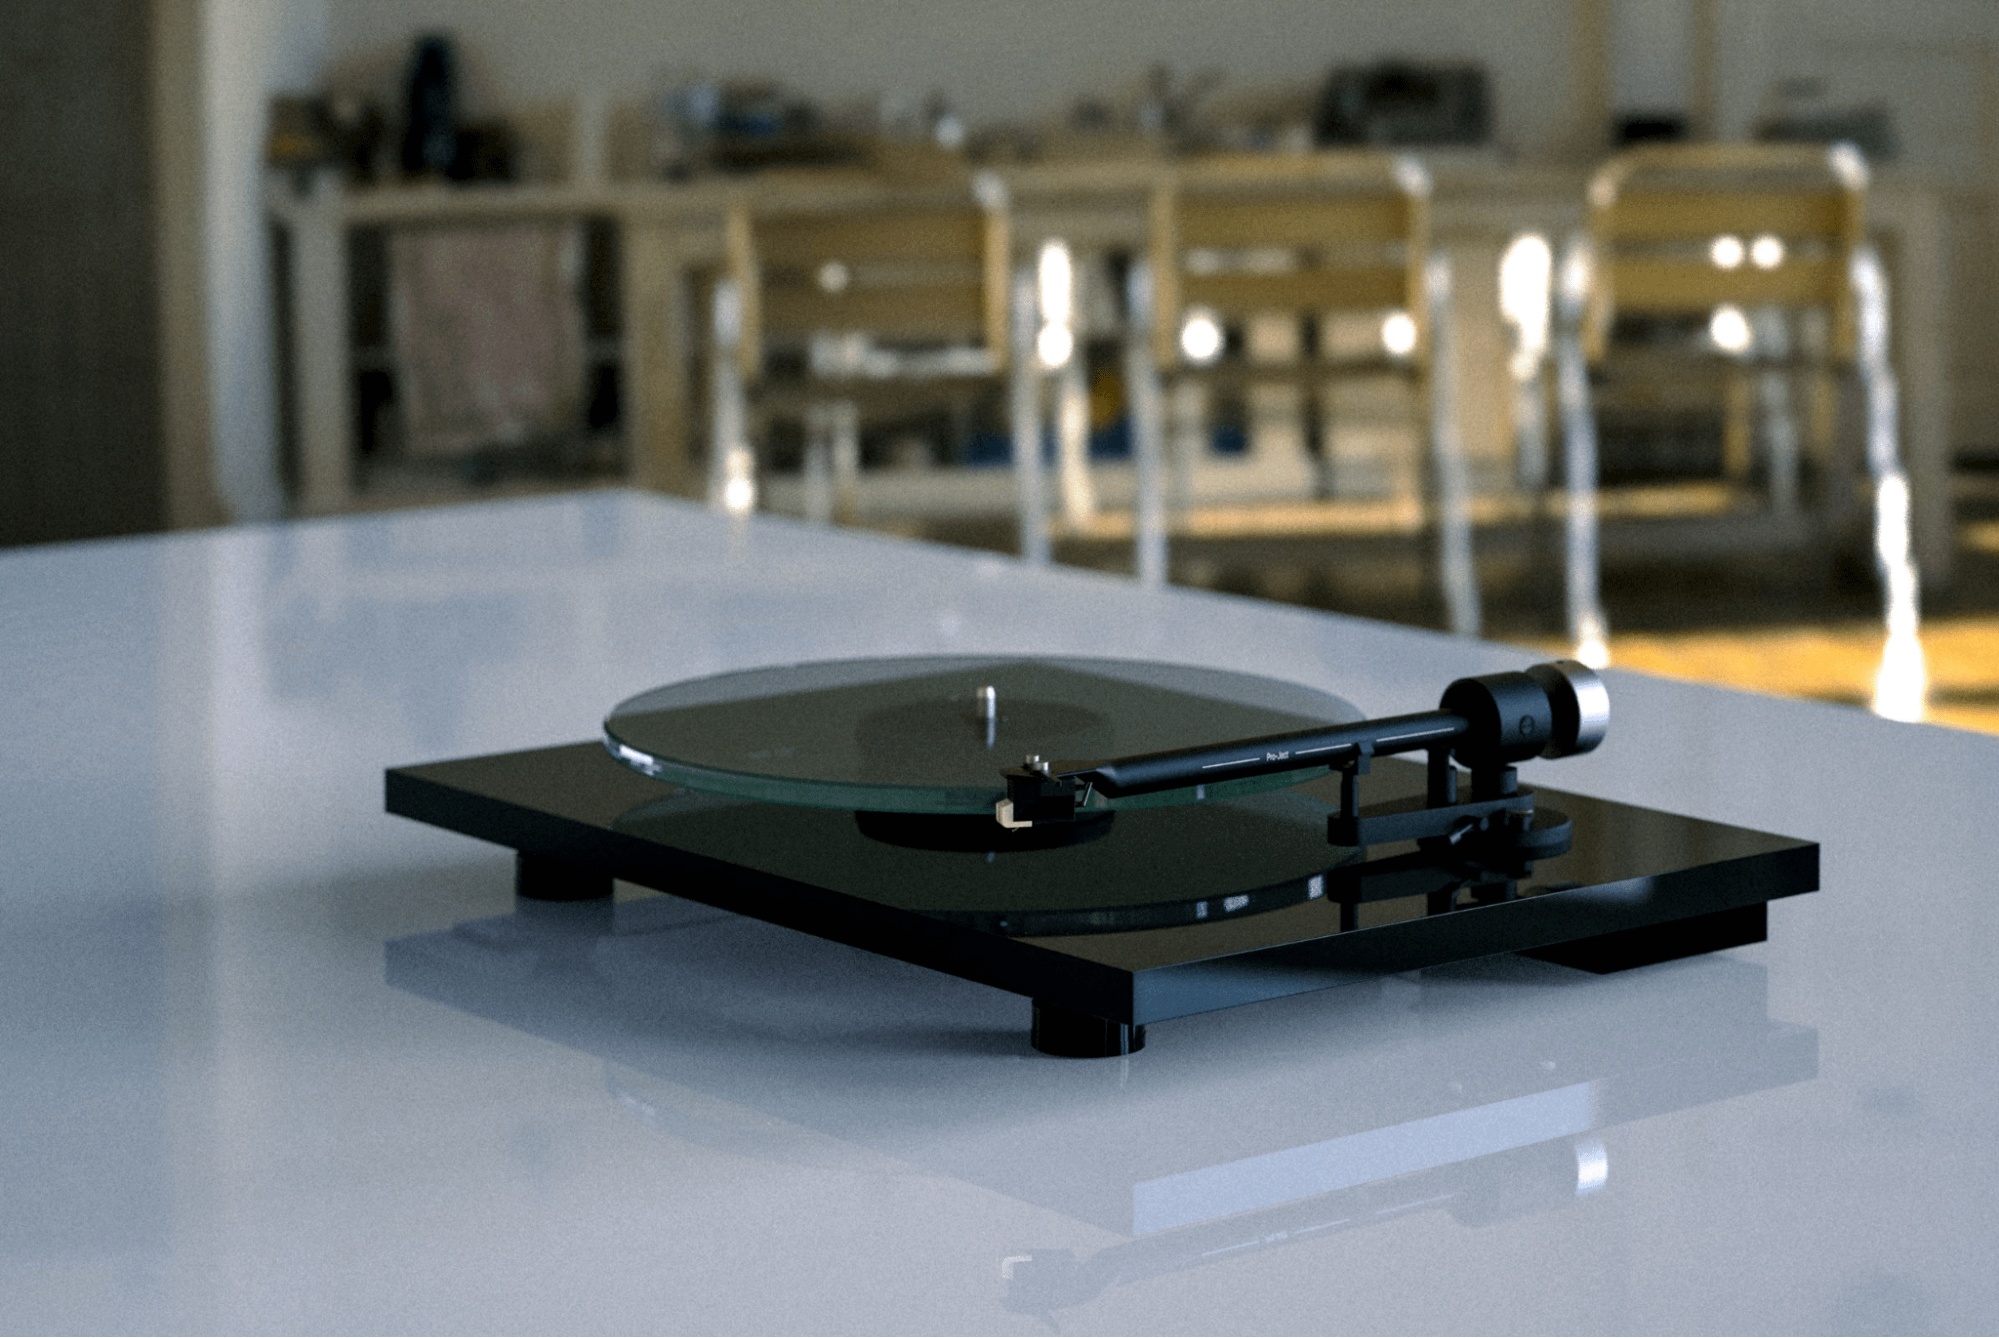 Pro-Ject T2 W Turntable with WiFi Streamer Instruction Manual